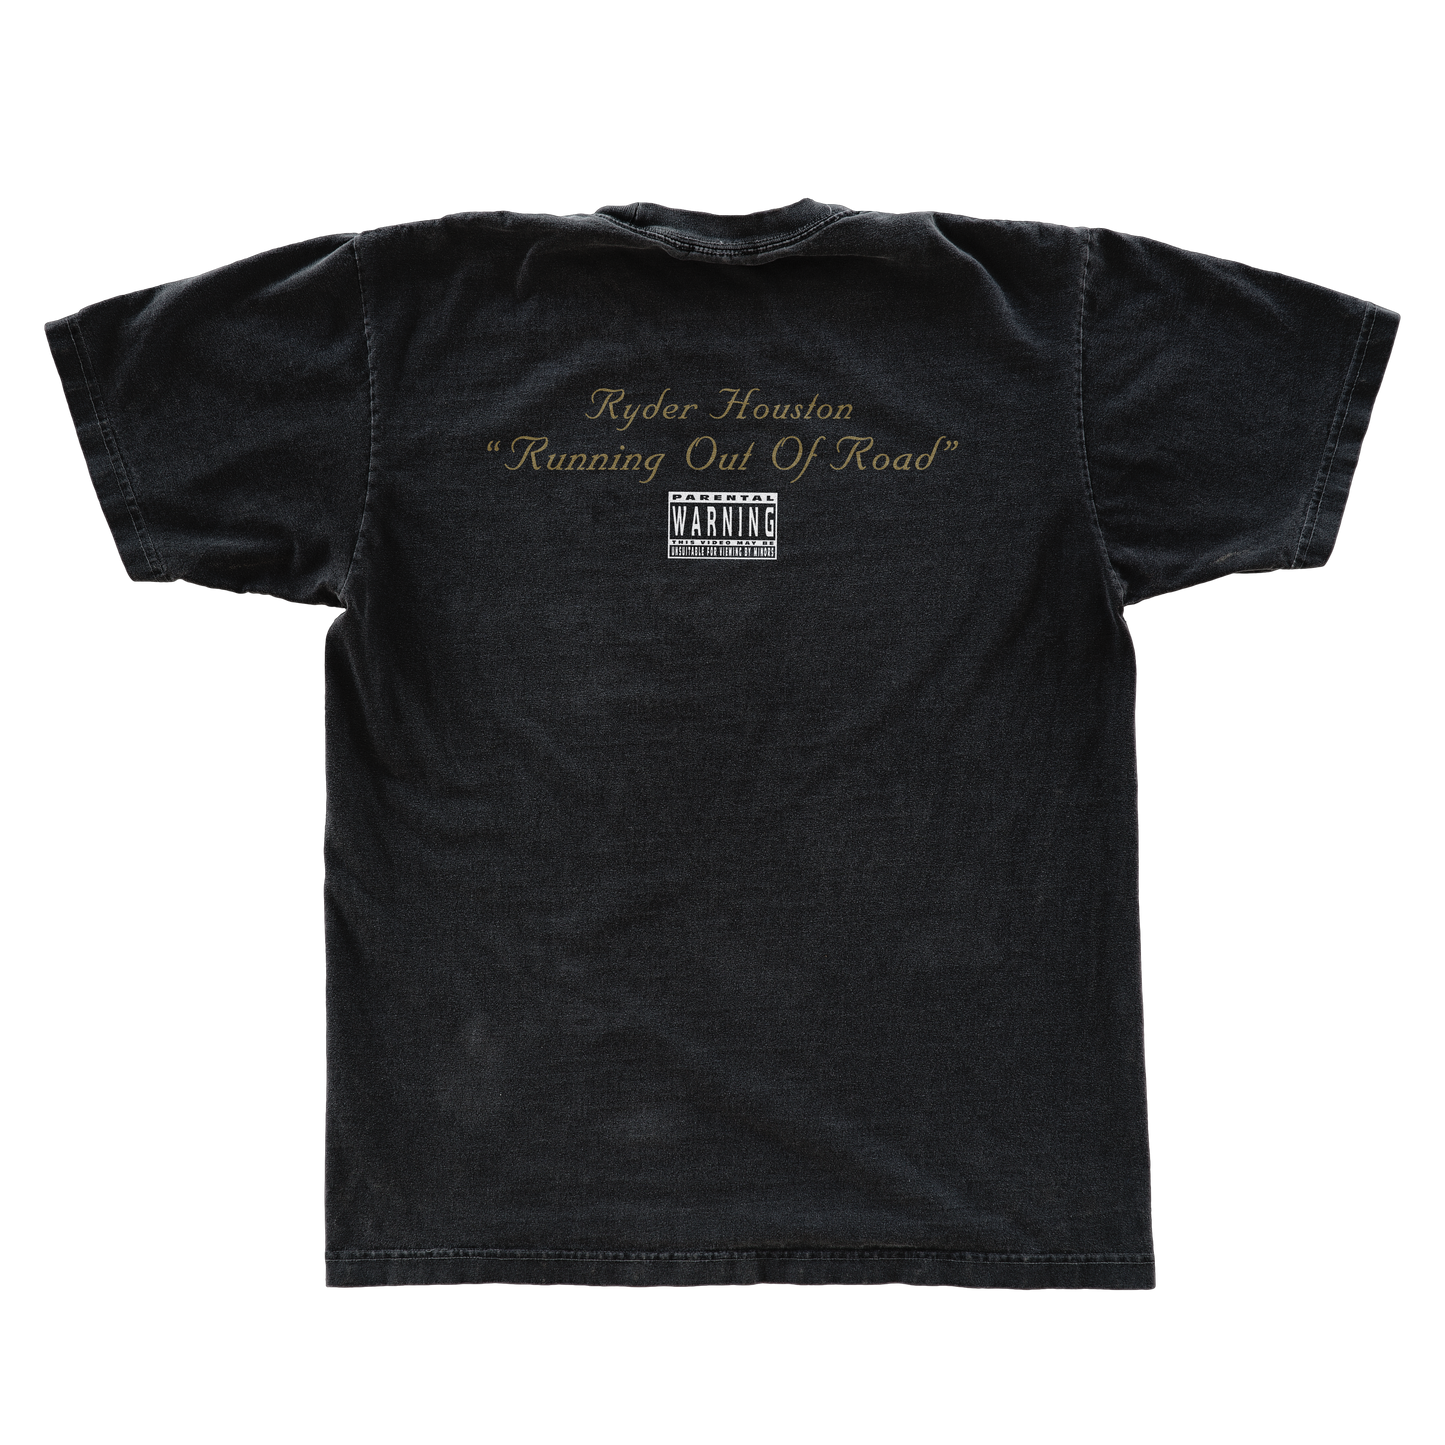 Running Out Of Road “Mr. Erotica” Black T-Shirt